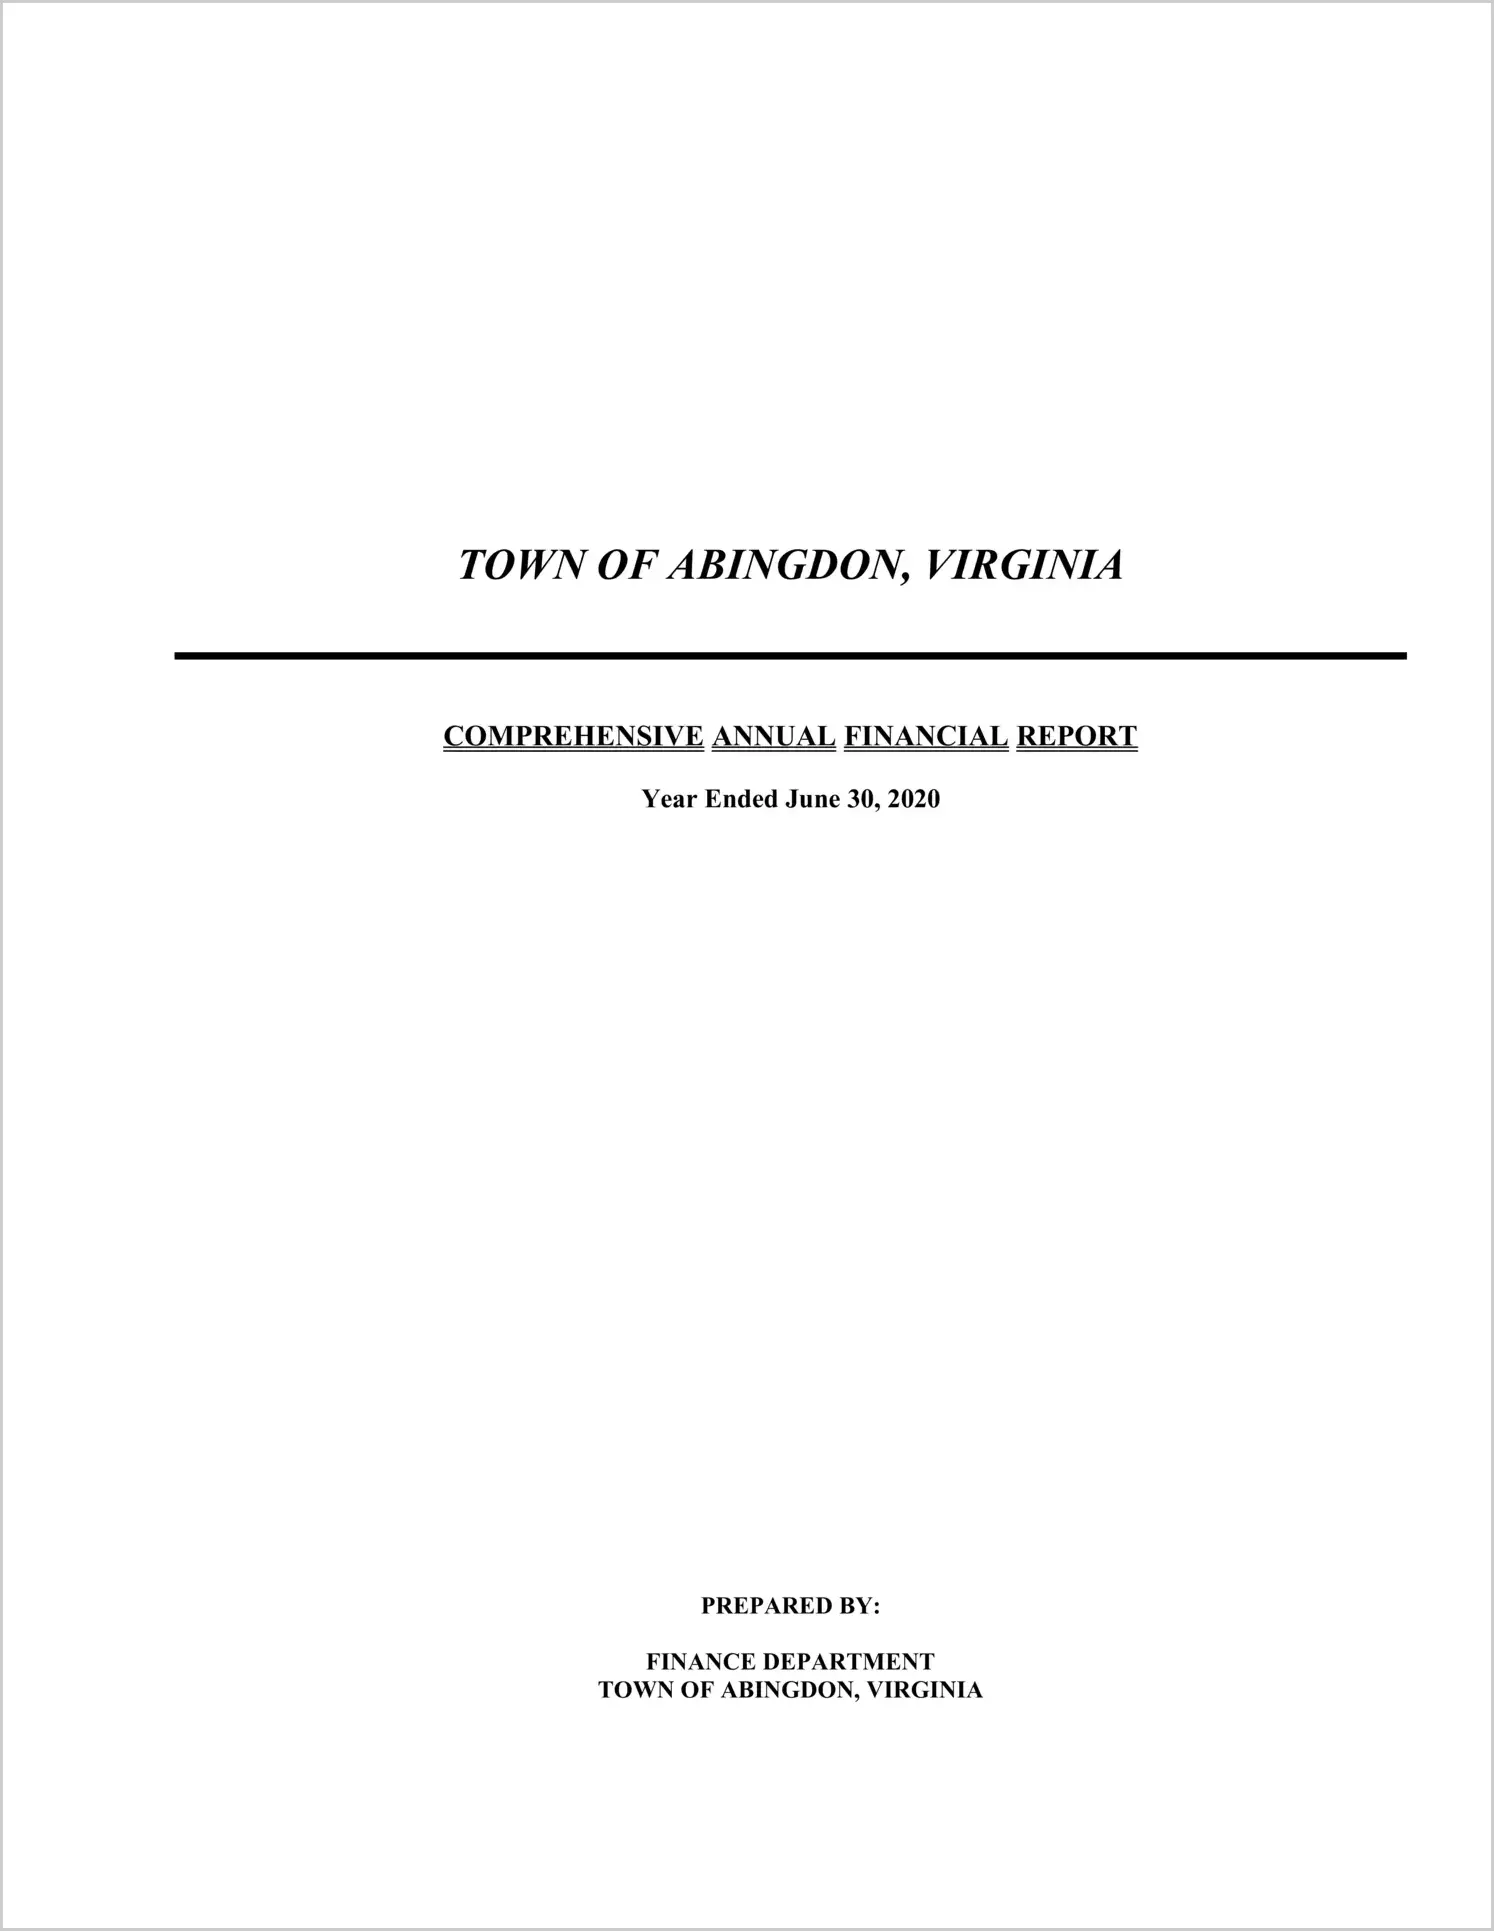 2020 Annual Financial Report for Town of Abingdon